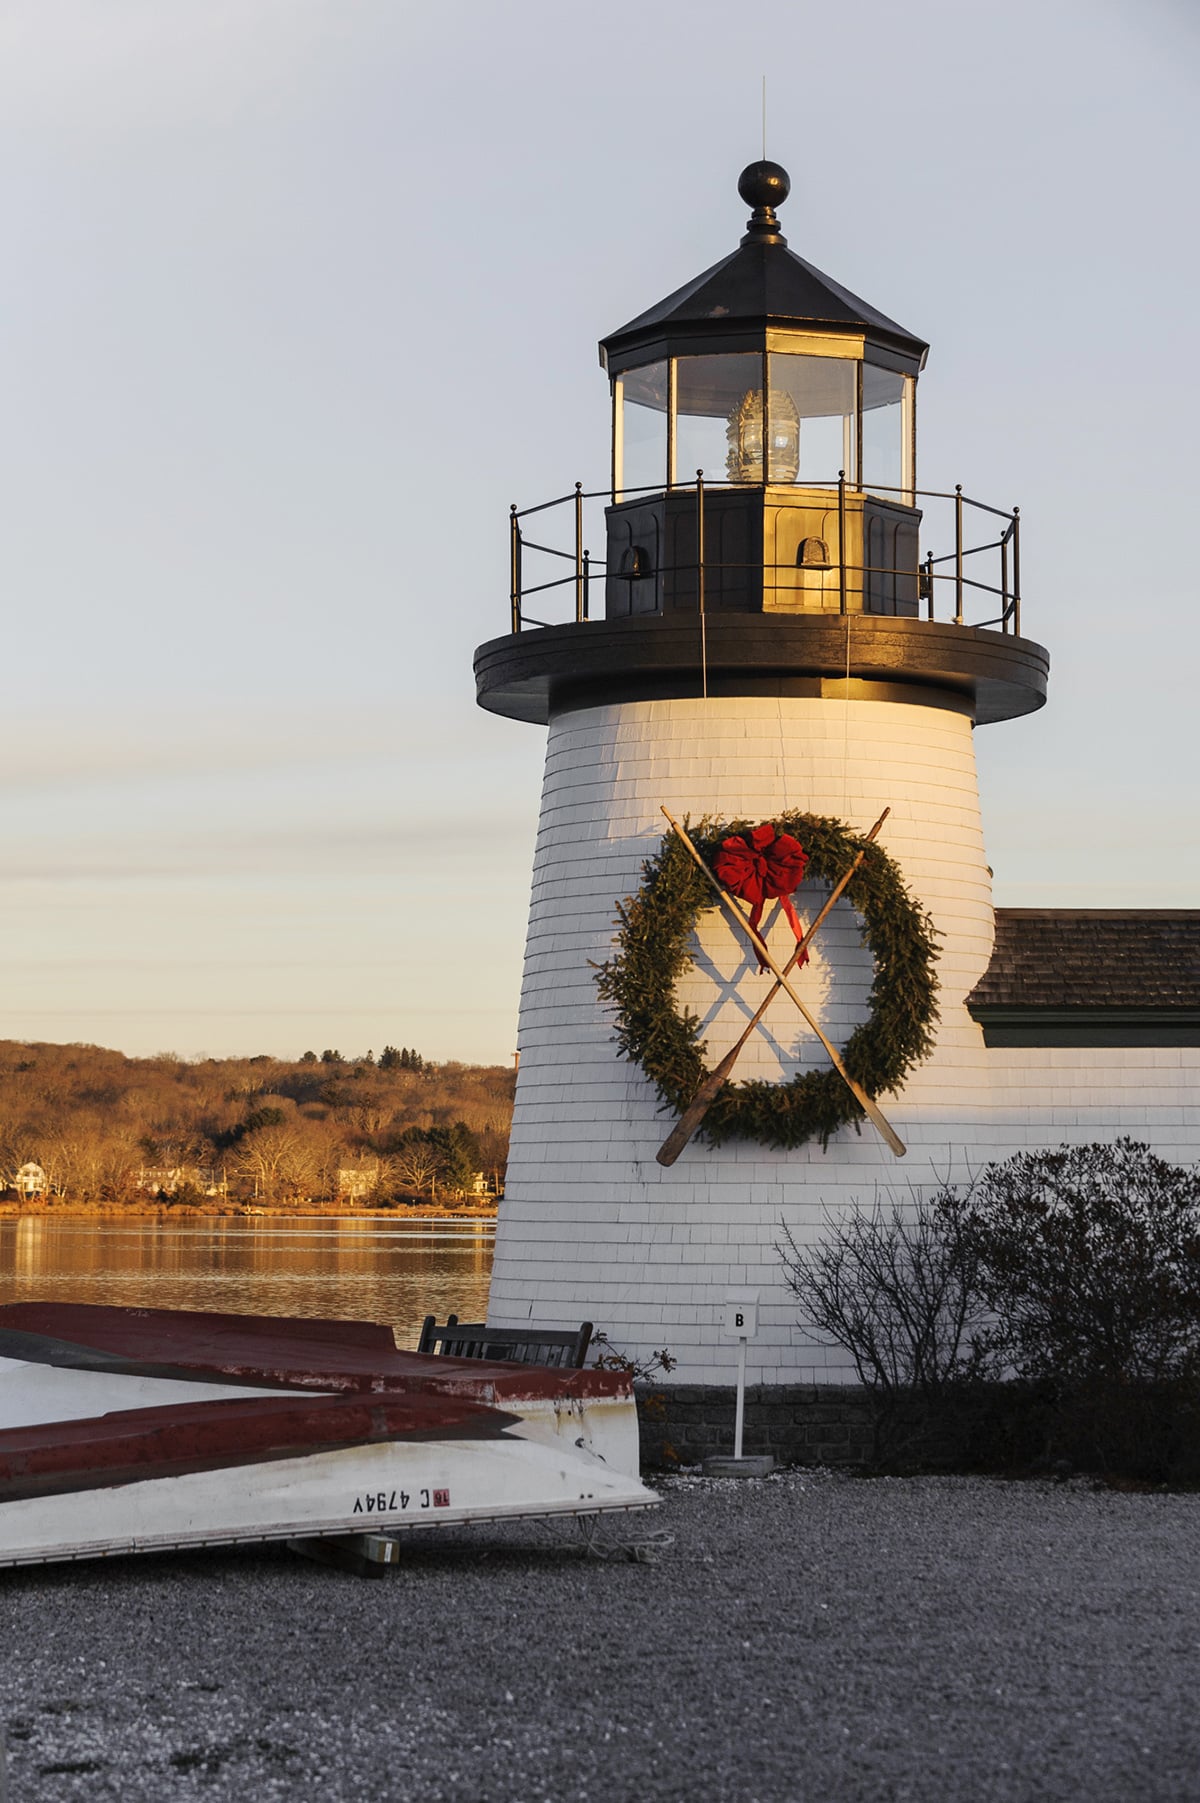 A replica of Nantucket's Brant Point lighthouse adorned with a Christmas wreath at Mystic Seaport.